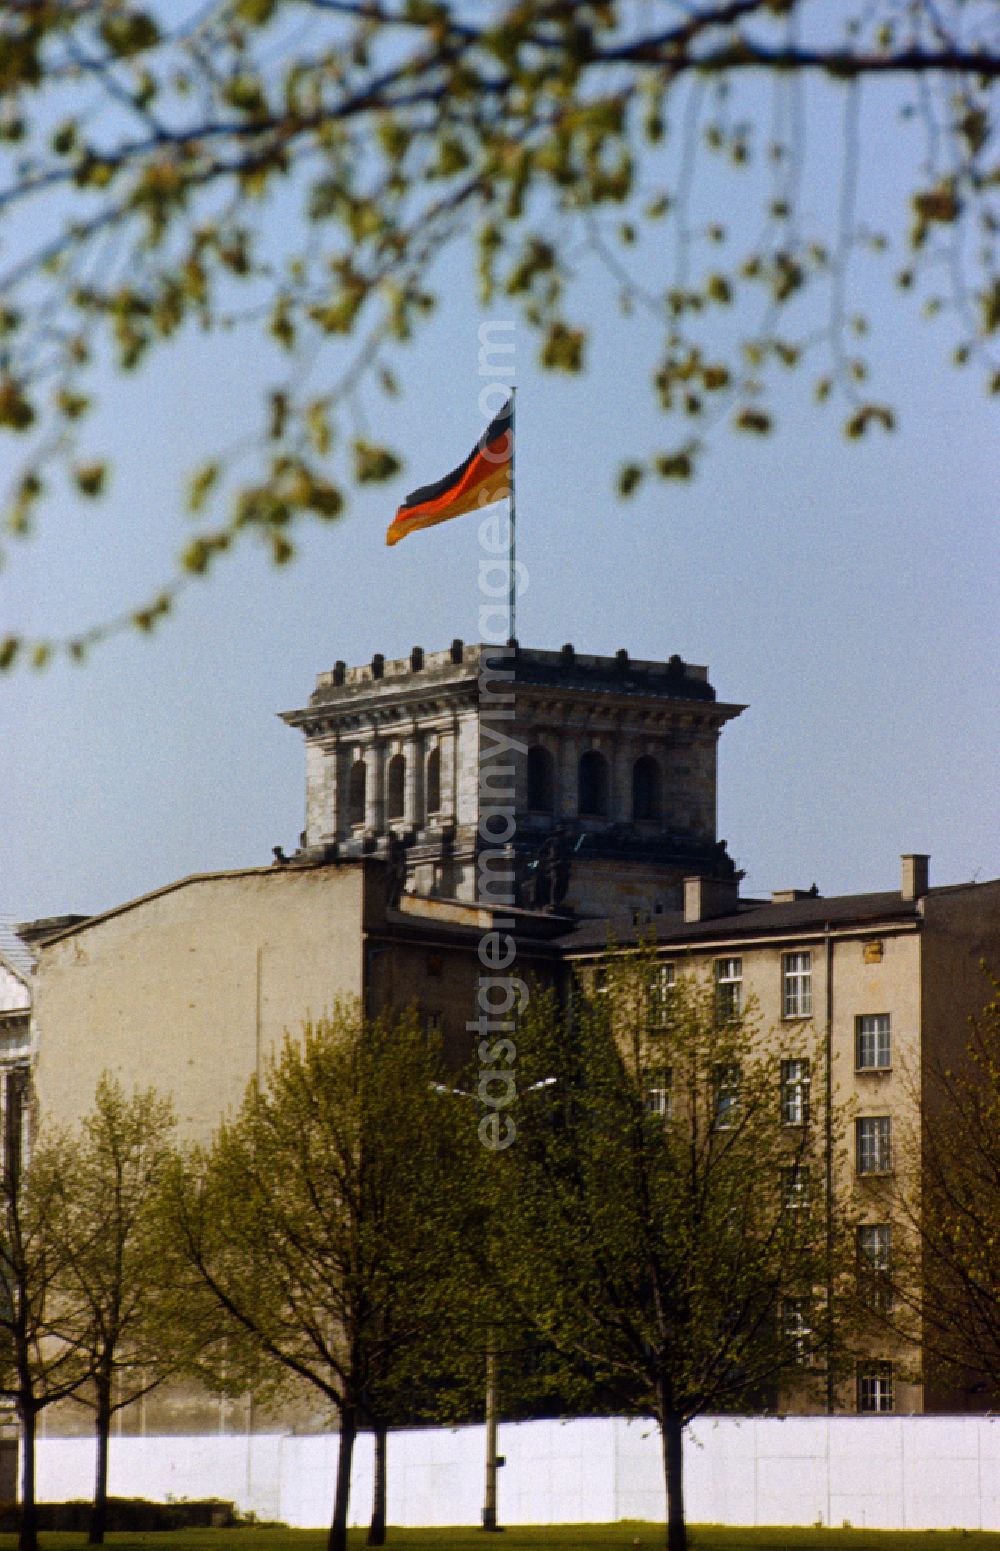 GDR image archive: Berlin - View over the wall towards the Reichstag with tower and Germany flag in Berlin-Mitte on the territory of the former GDR, German Democratic Republic